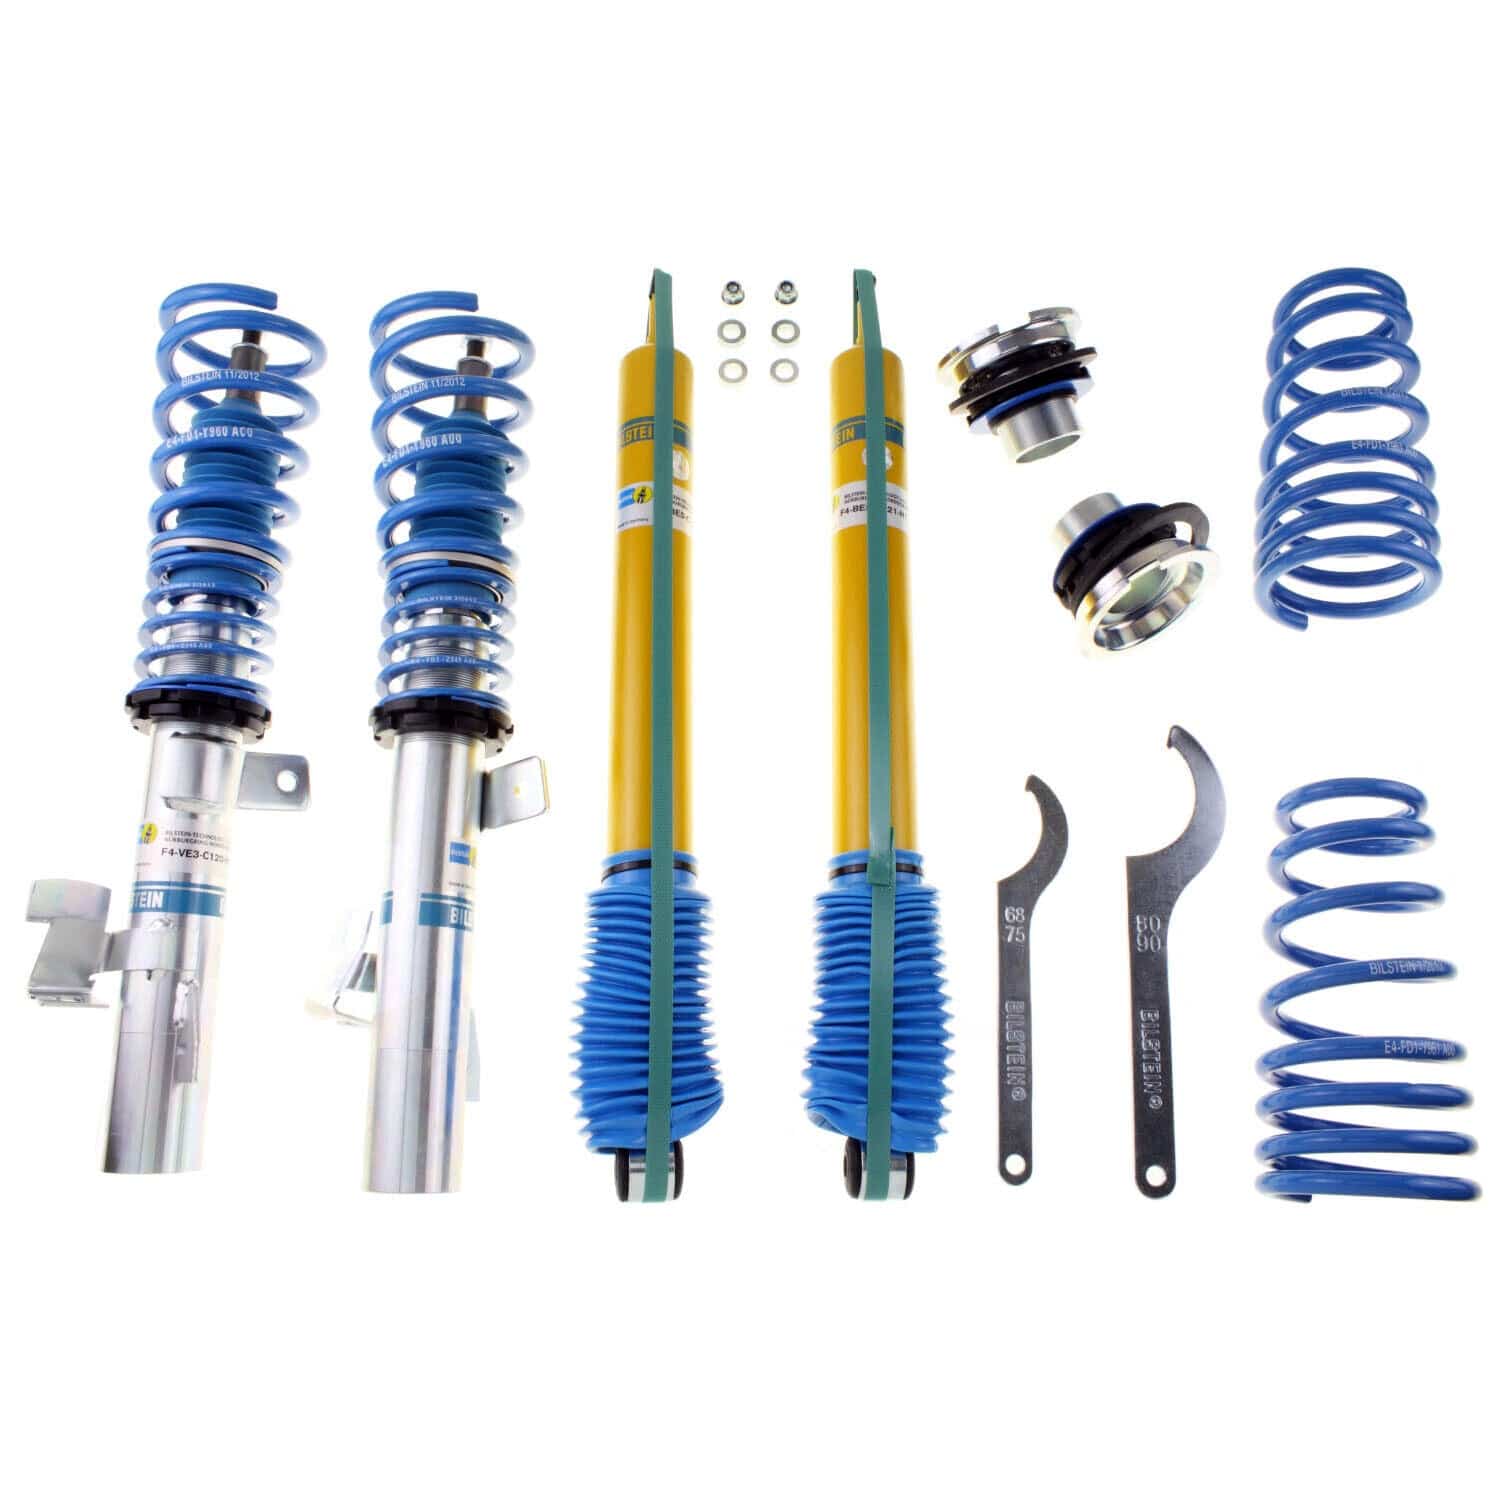 Bilstein B14 Coilovers for 2004-2013 Ford Focus 47-121225